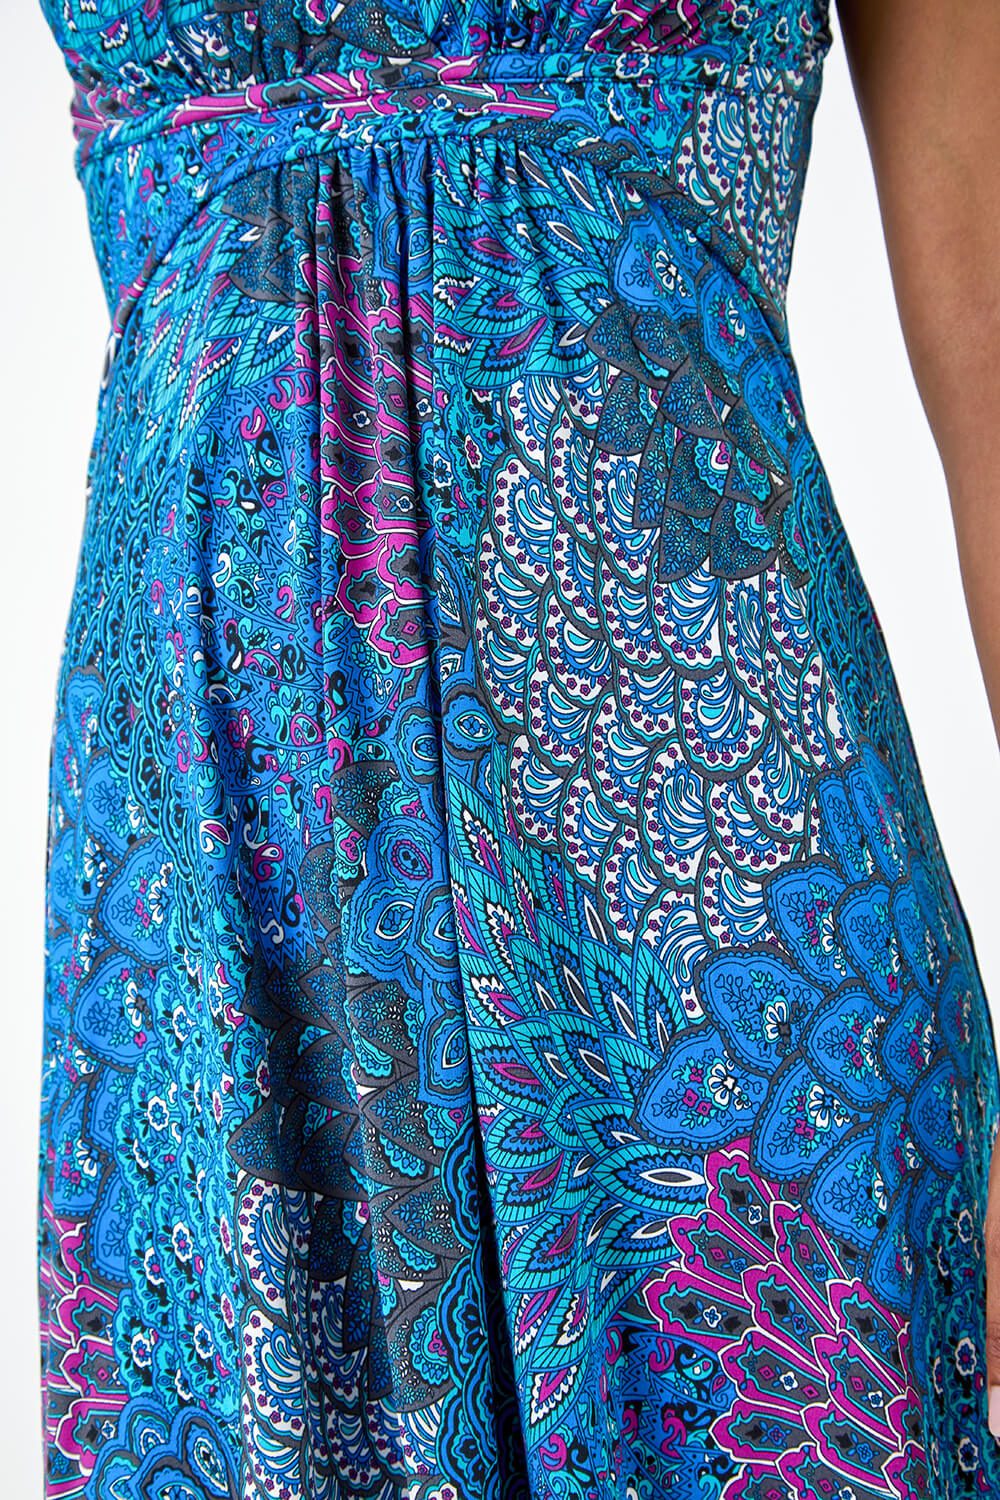 Blue Abstract Floral Stretch Jersey Dress, Image 5 of 5